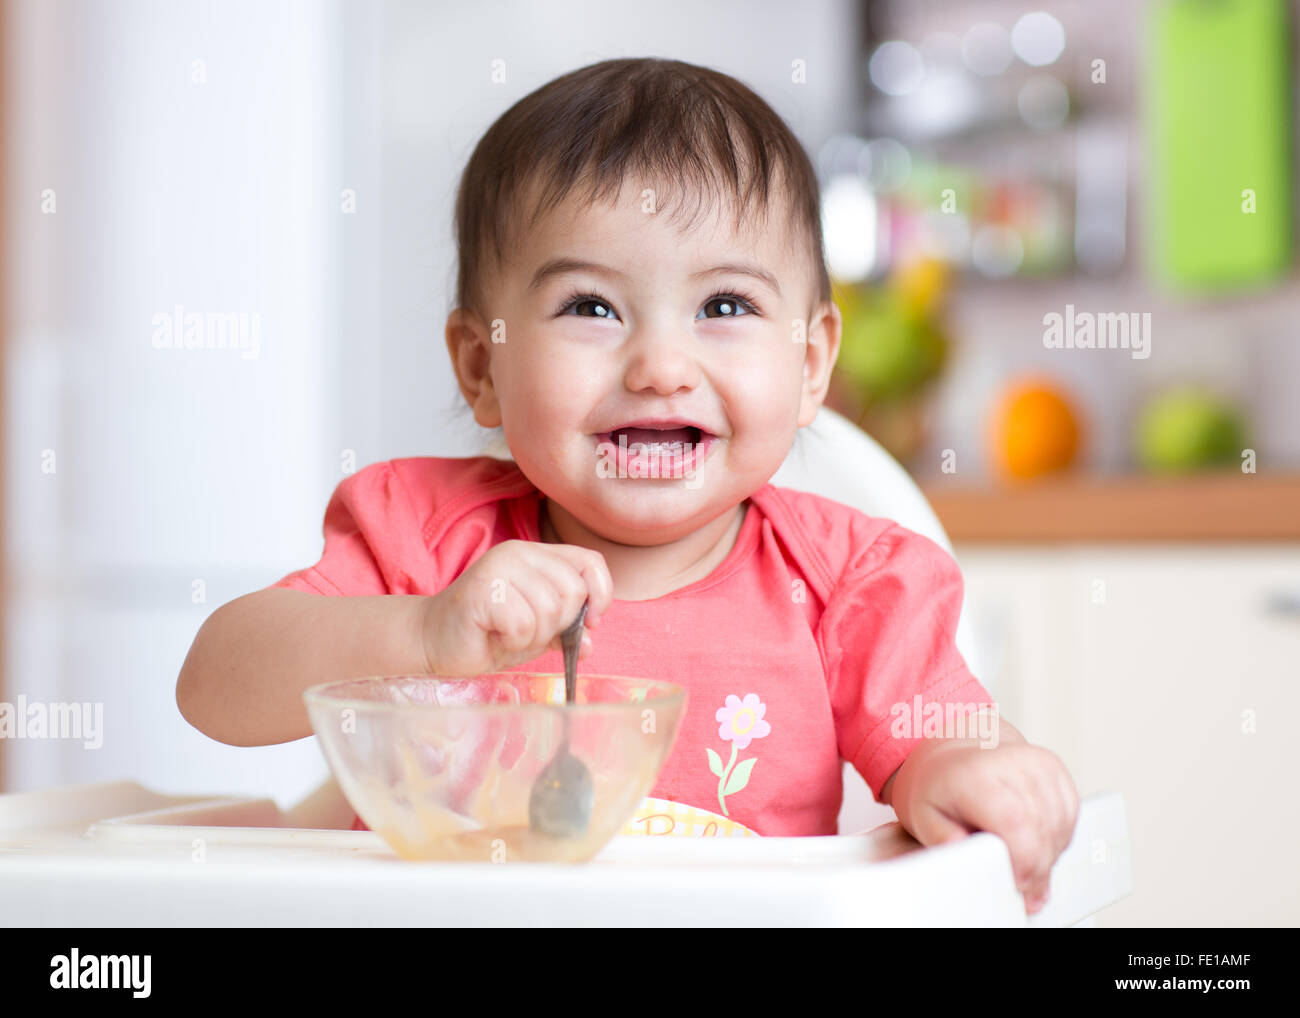 cheerful baby child eating food itself with a spoon Stock Photo